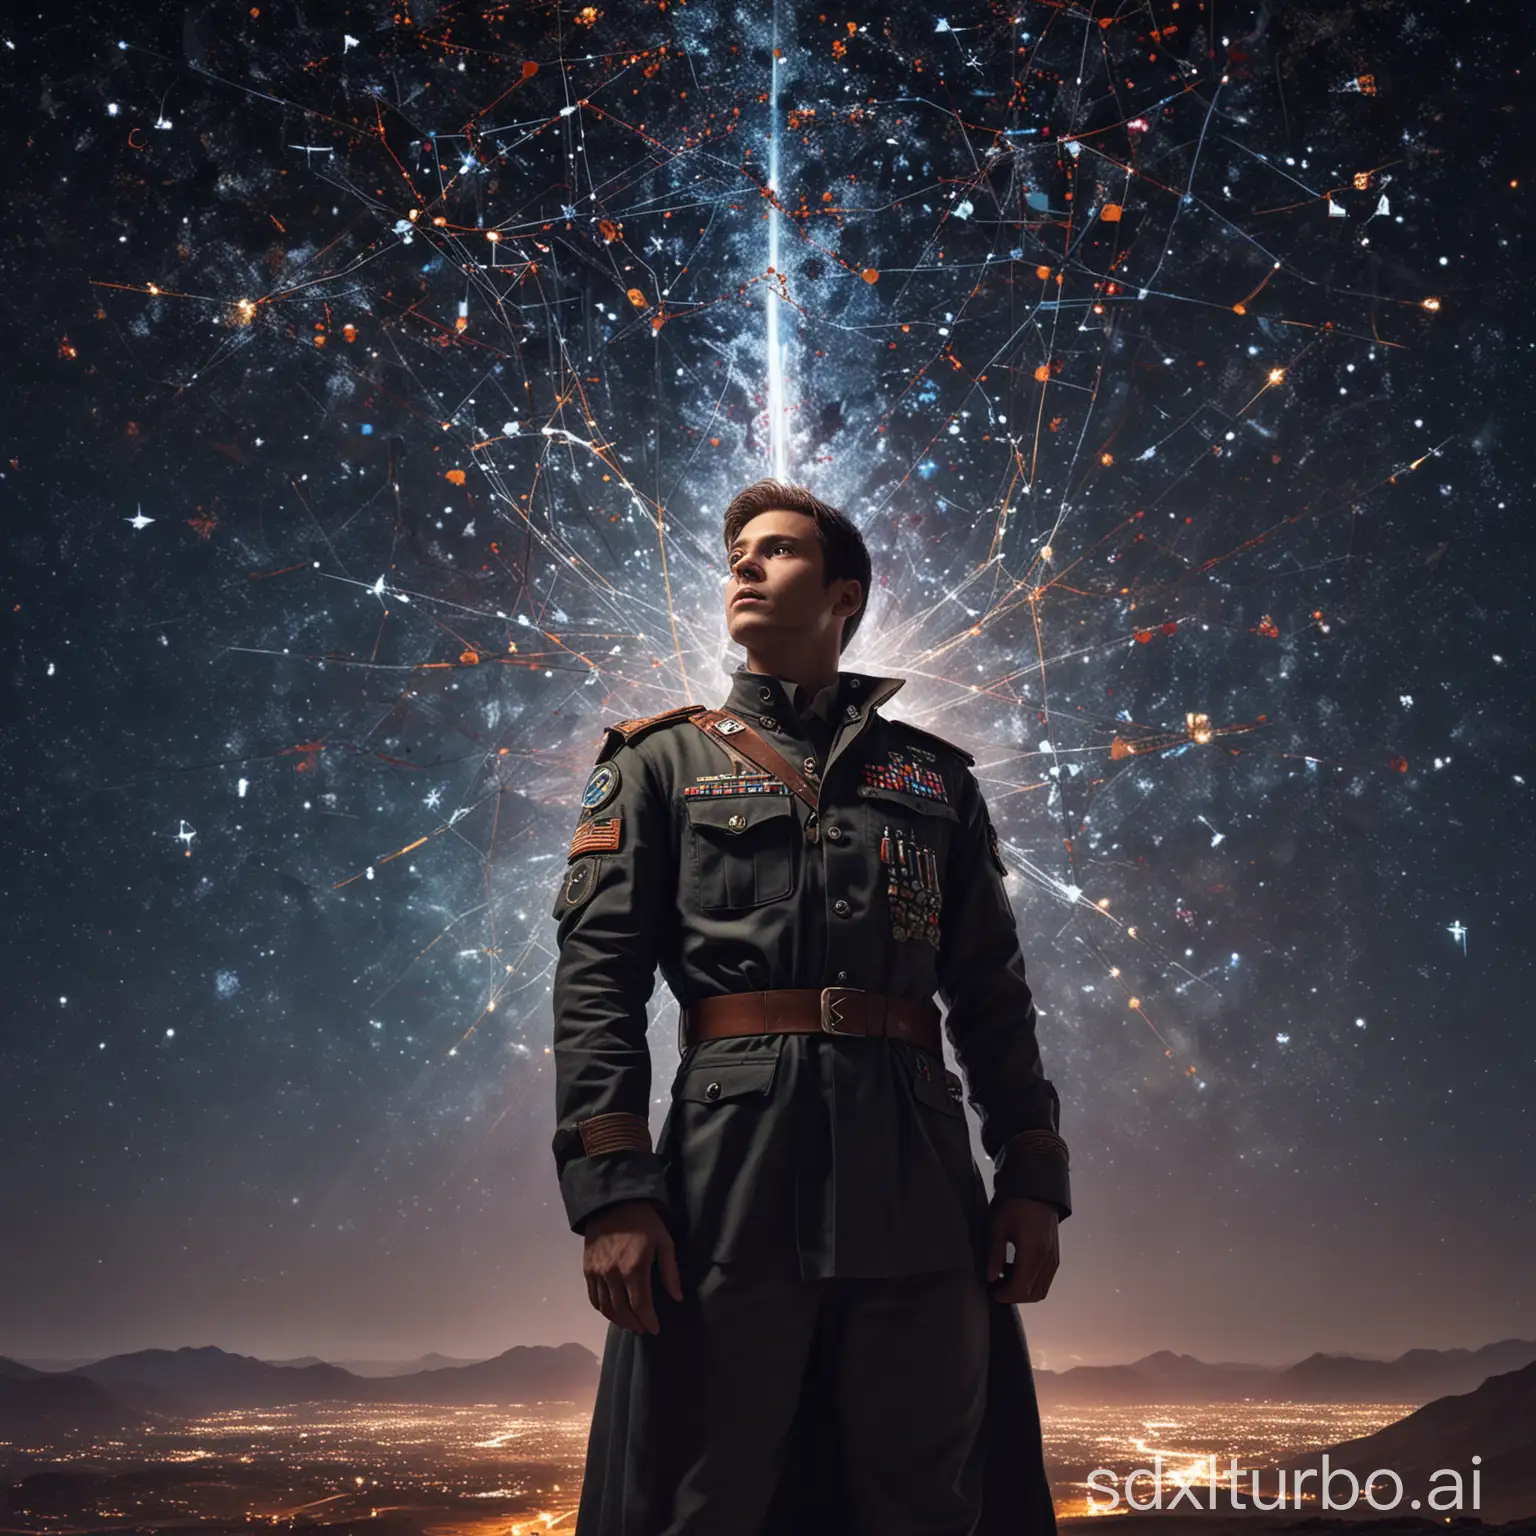 The ENTP Debater, dressed in futuristic lab attire, holds a luminous torch symbolizing the spark of innovation. He stands in a lab filled with high-tech equipment and flickering screens, surrounded by abstract symbols and patterns representing the sparks of innovative thinking. The ENTJ Commander, clad in a crisp military uniform and holding a telescope, stands atop a towering command tower, overlooking the battlefield and the spread-out strategic map below. His eyes gleam with determination and wisdom. Above their heads is a starry sky composed of constellation patterns for each MBTI type, under which they, with different colors and dreams, jointly guard our homeland.